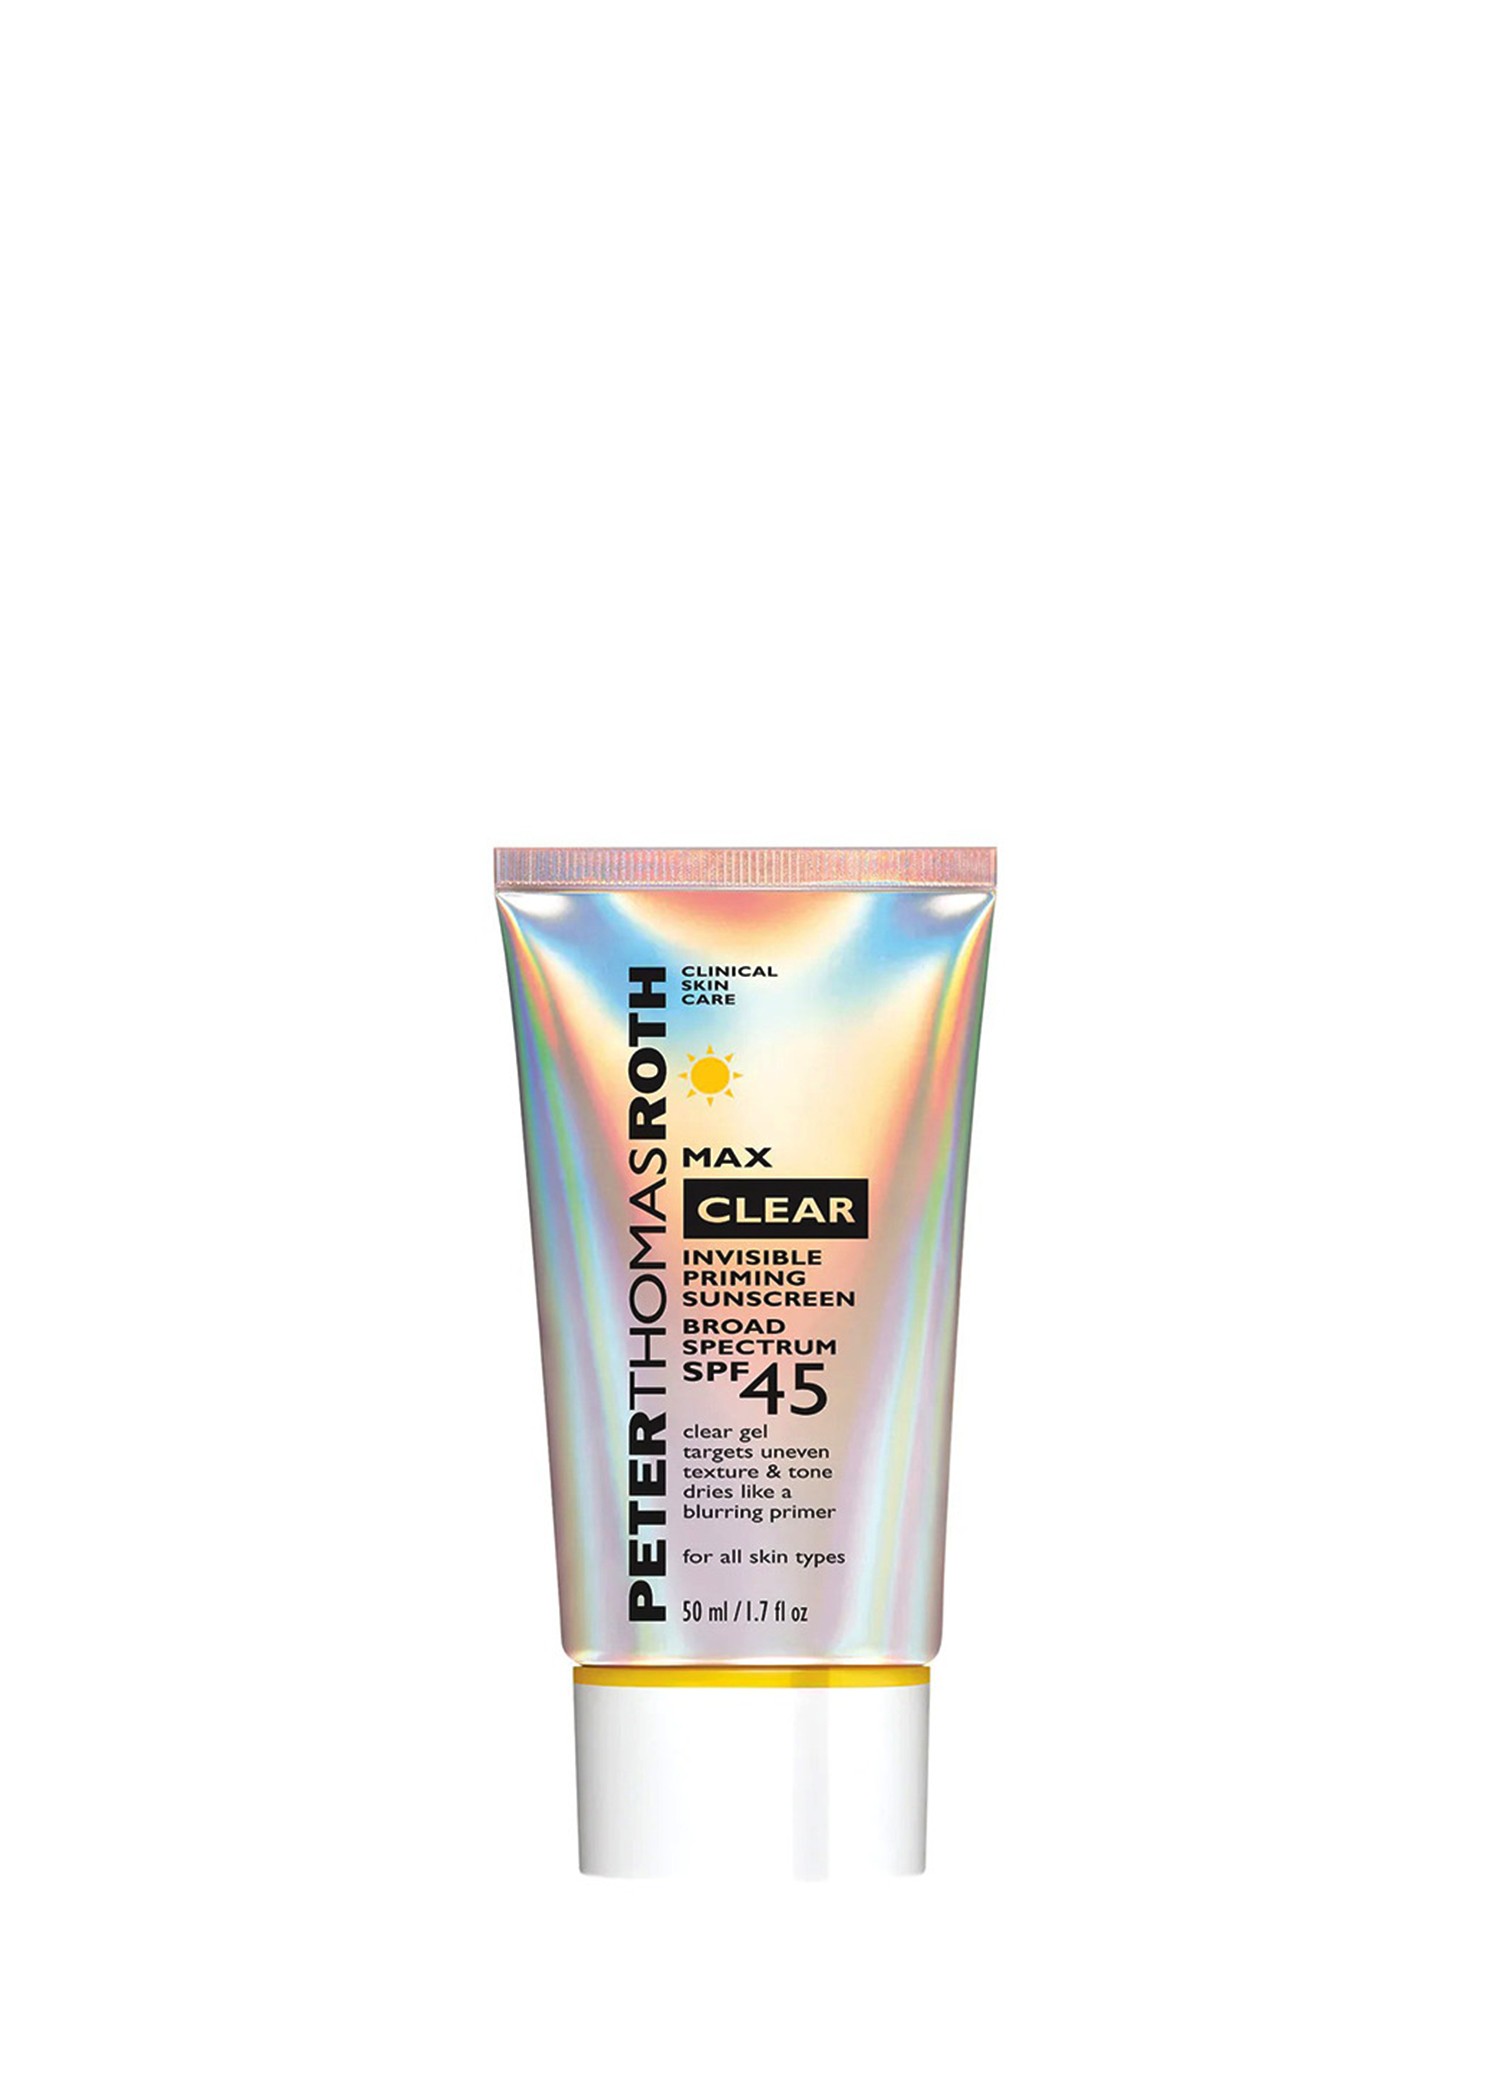 Max Clear Invisible Priming Sunscreen Broad Spectrum SPF 45 50 ml